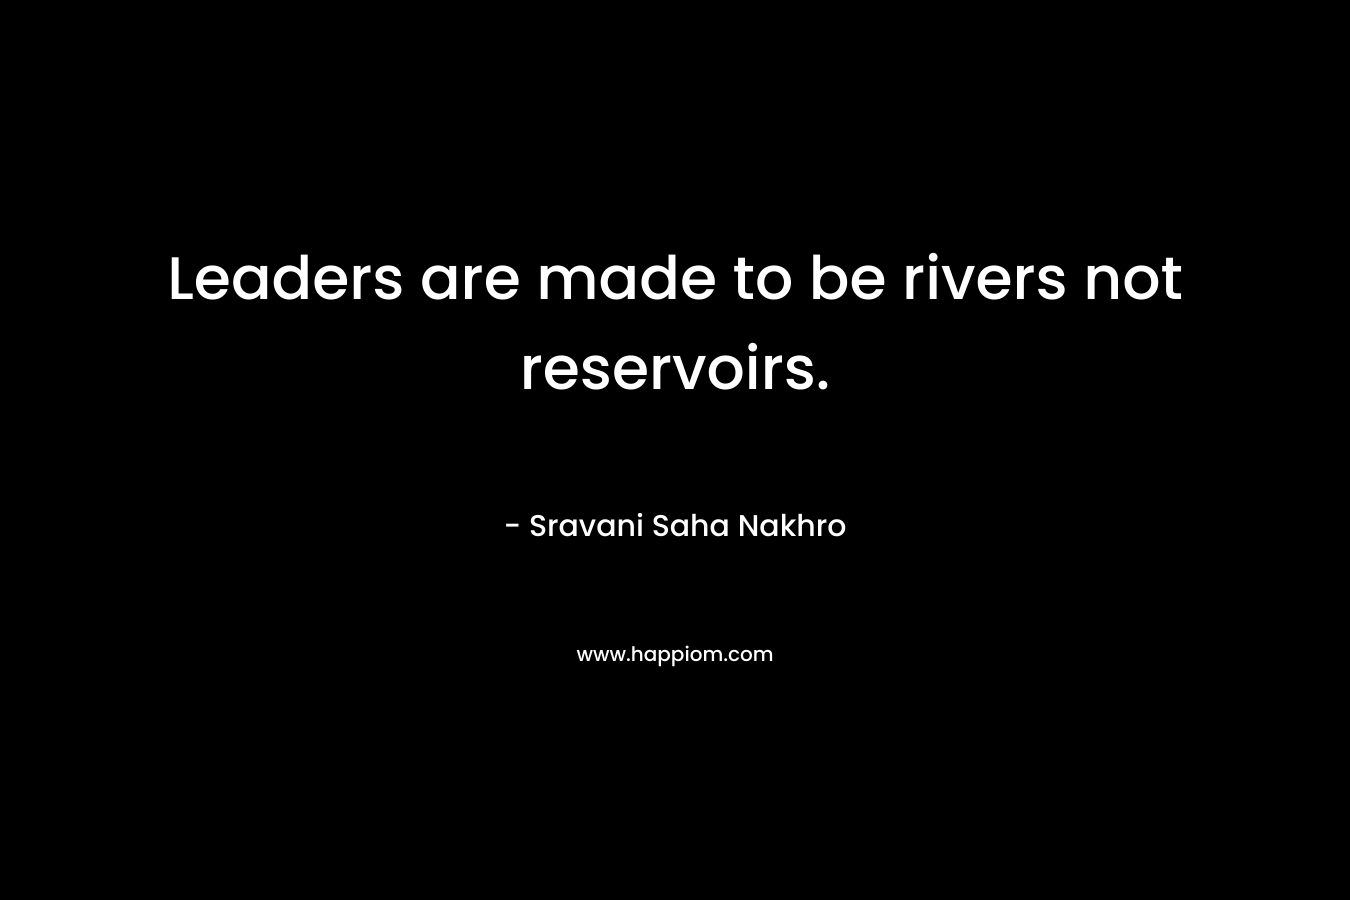 Leaders are made to be rivers not reservoirs. – Sravani Saha Nakhro